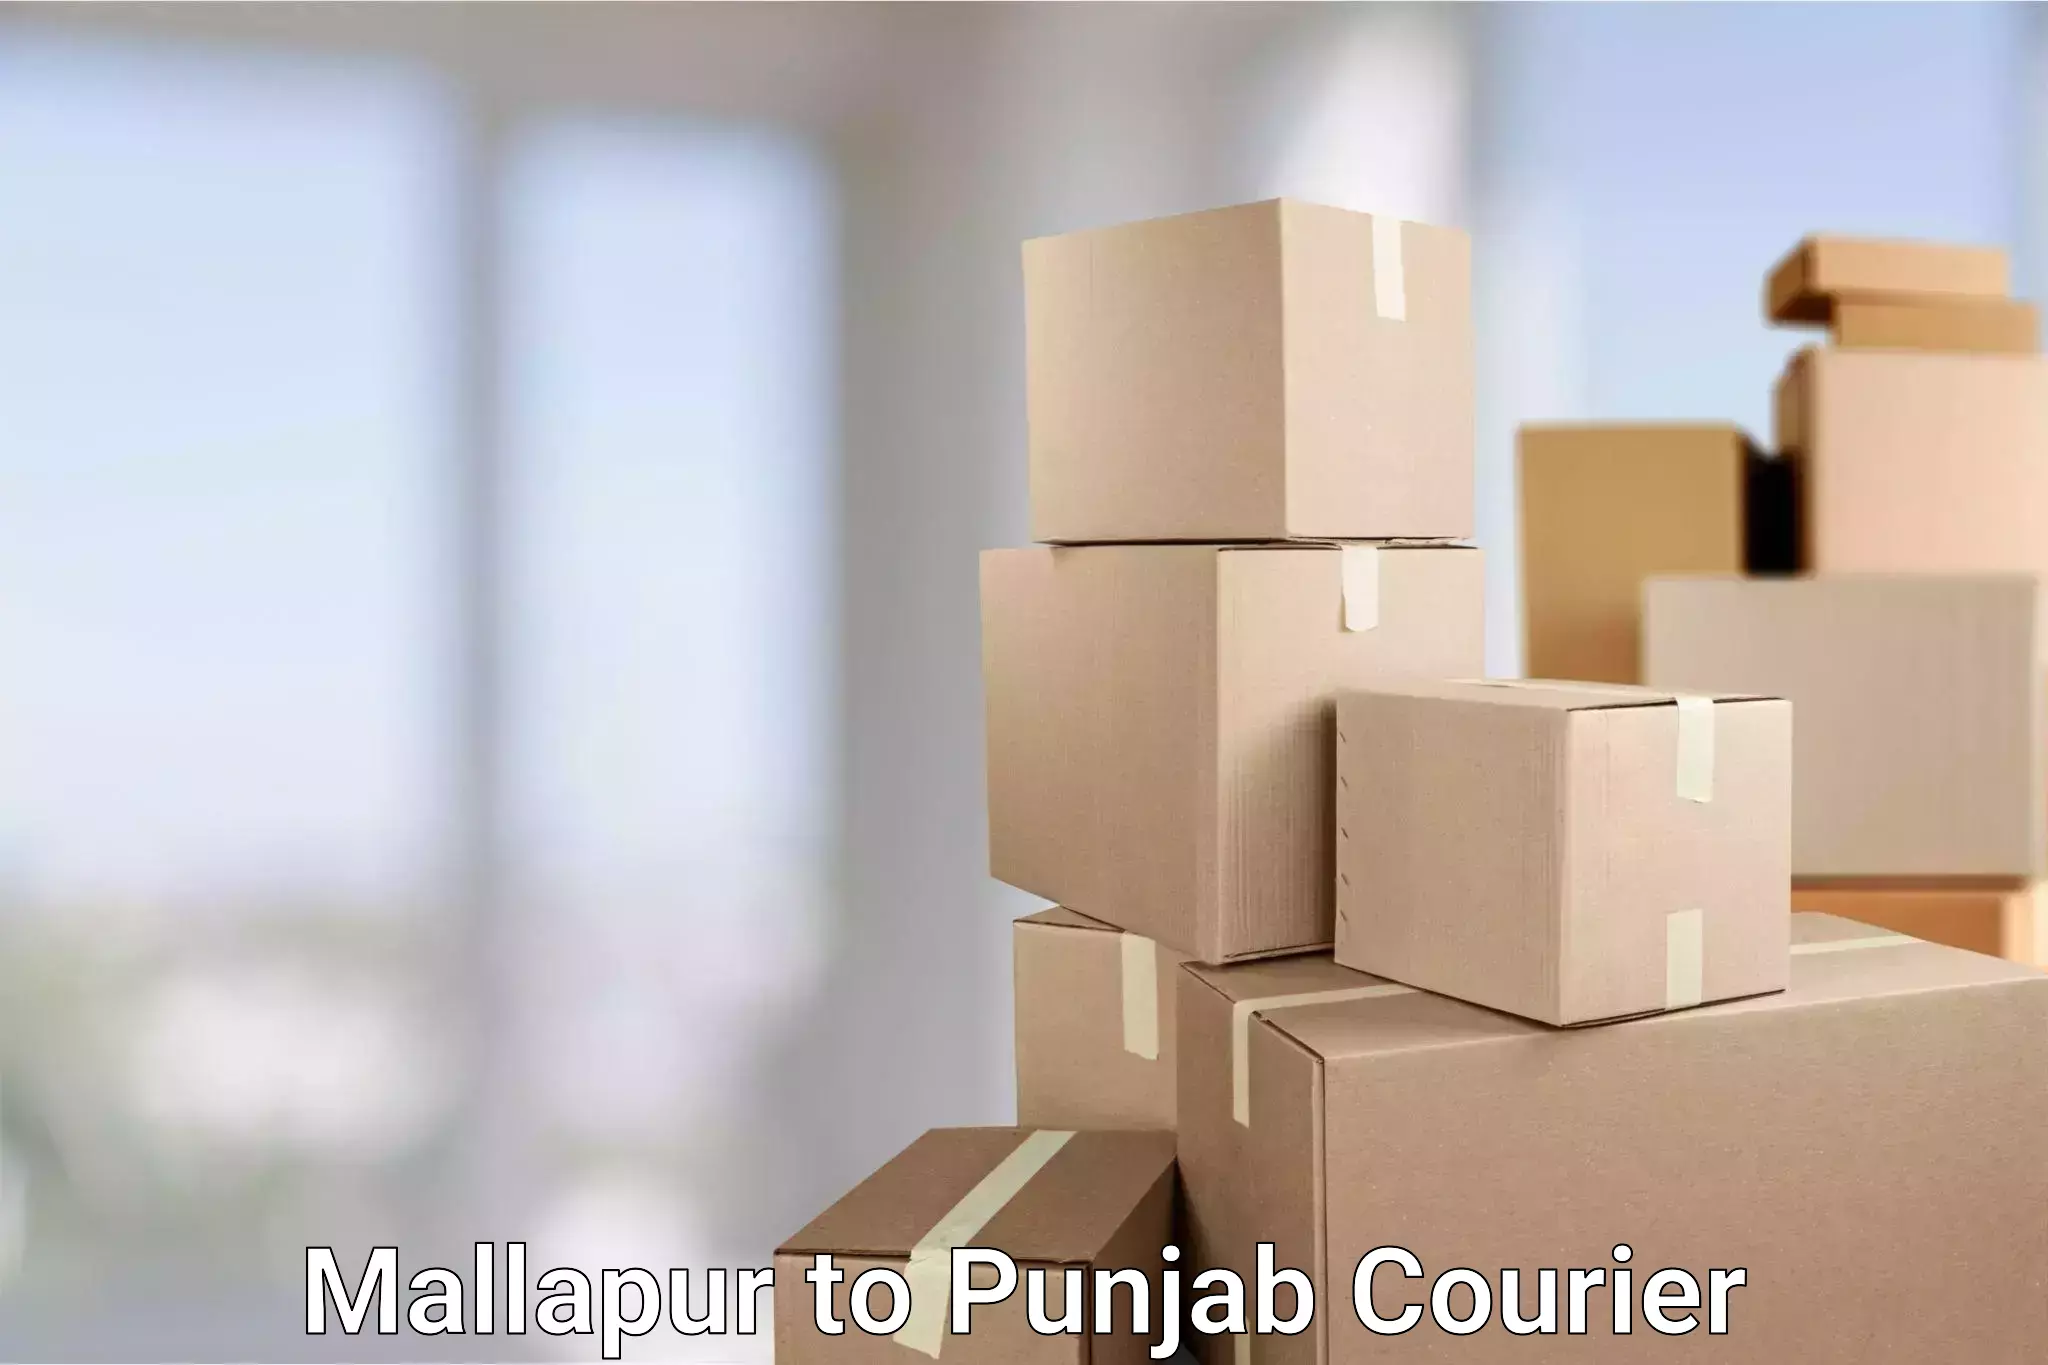 Tech-enabled shipping in Mallapur to Punjab